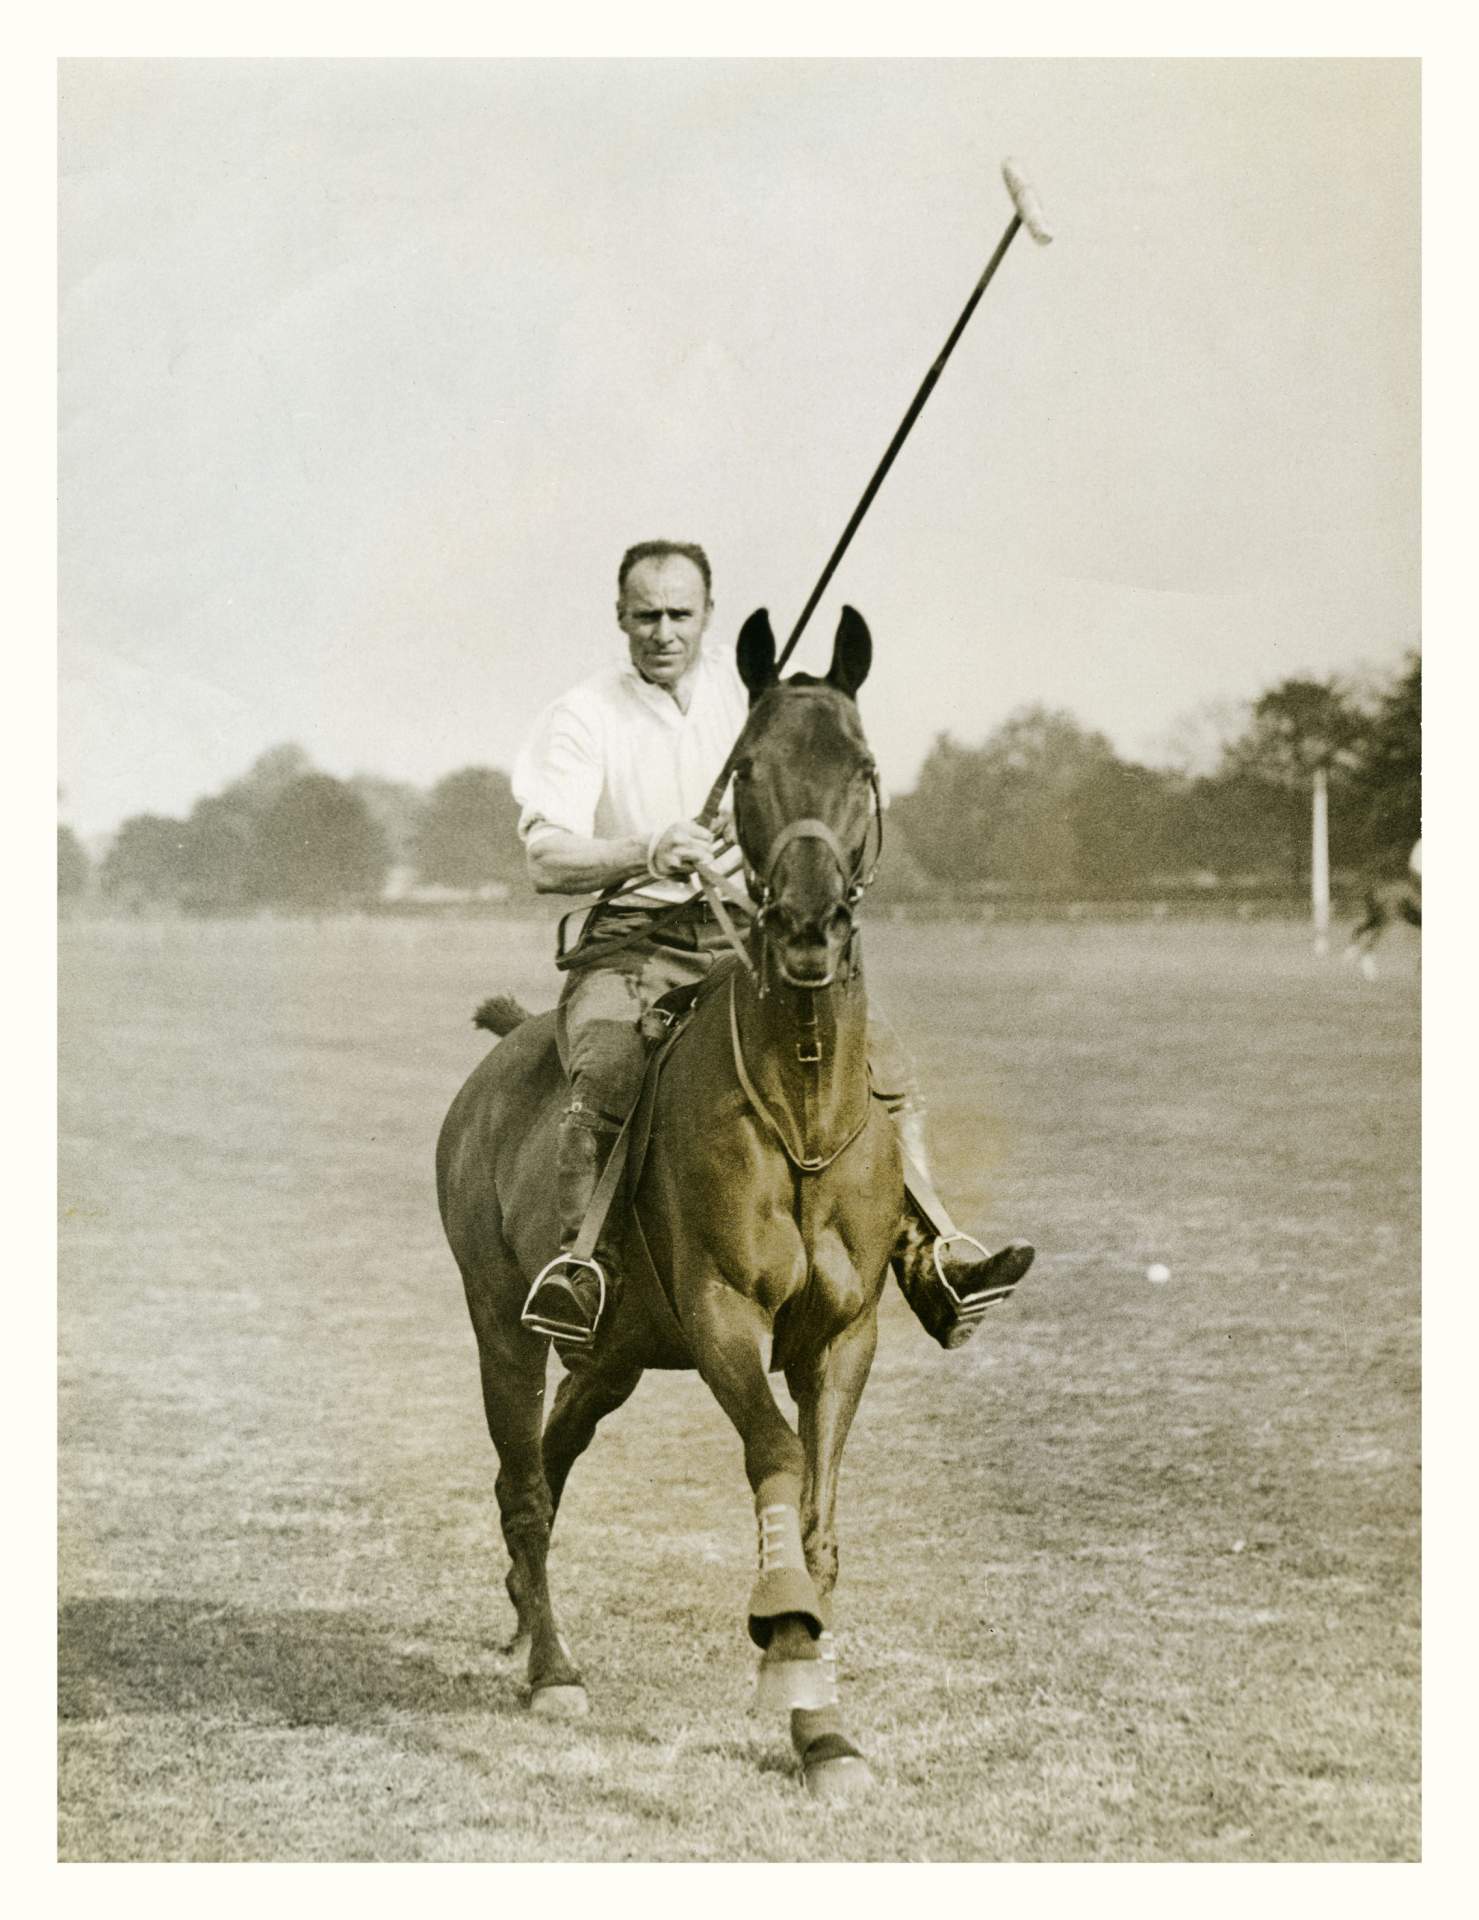 Charles Cary Rumsey at the American International Polo Players Practice at Sunbury, England